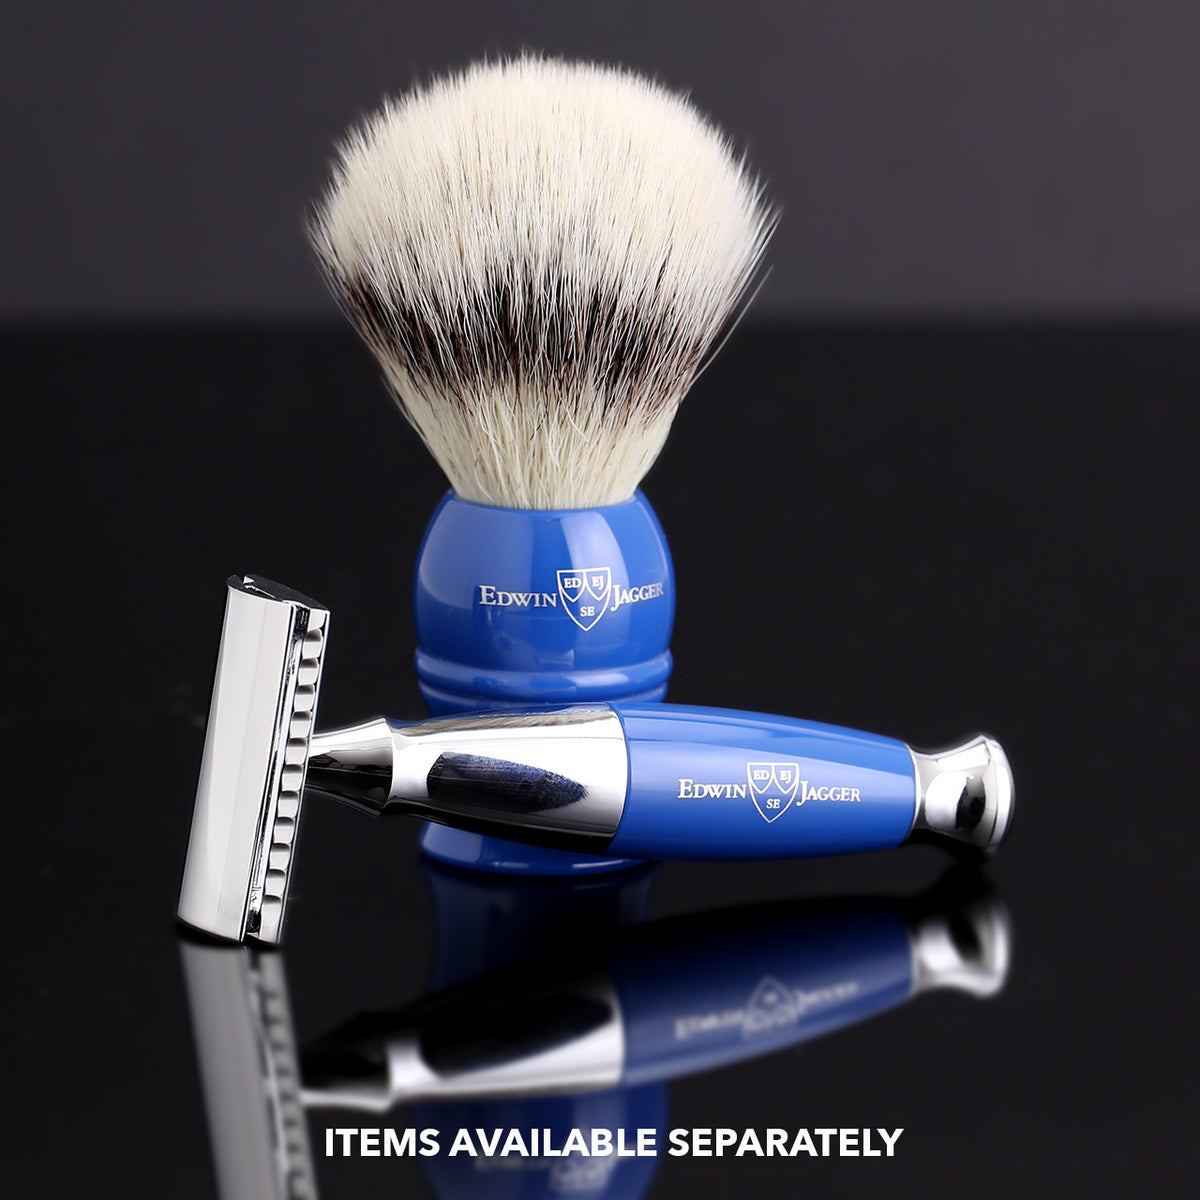 Edwin Jagger High Quality Cruelty-Free Shaving Brush with matching Blue Safety Razor (available separately)